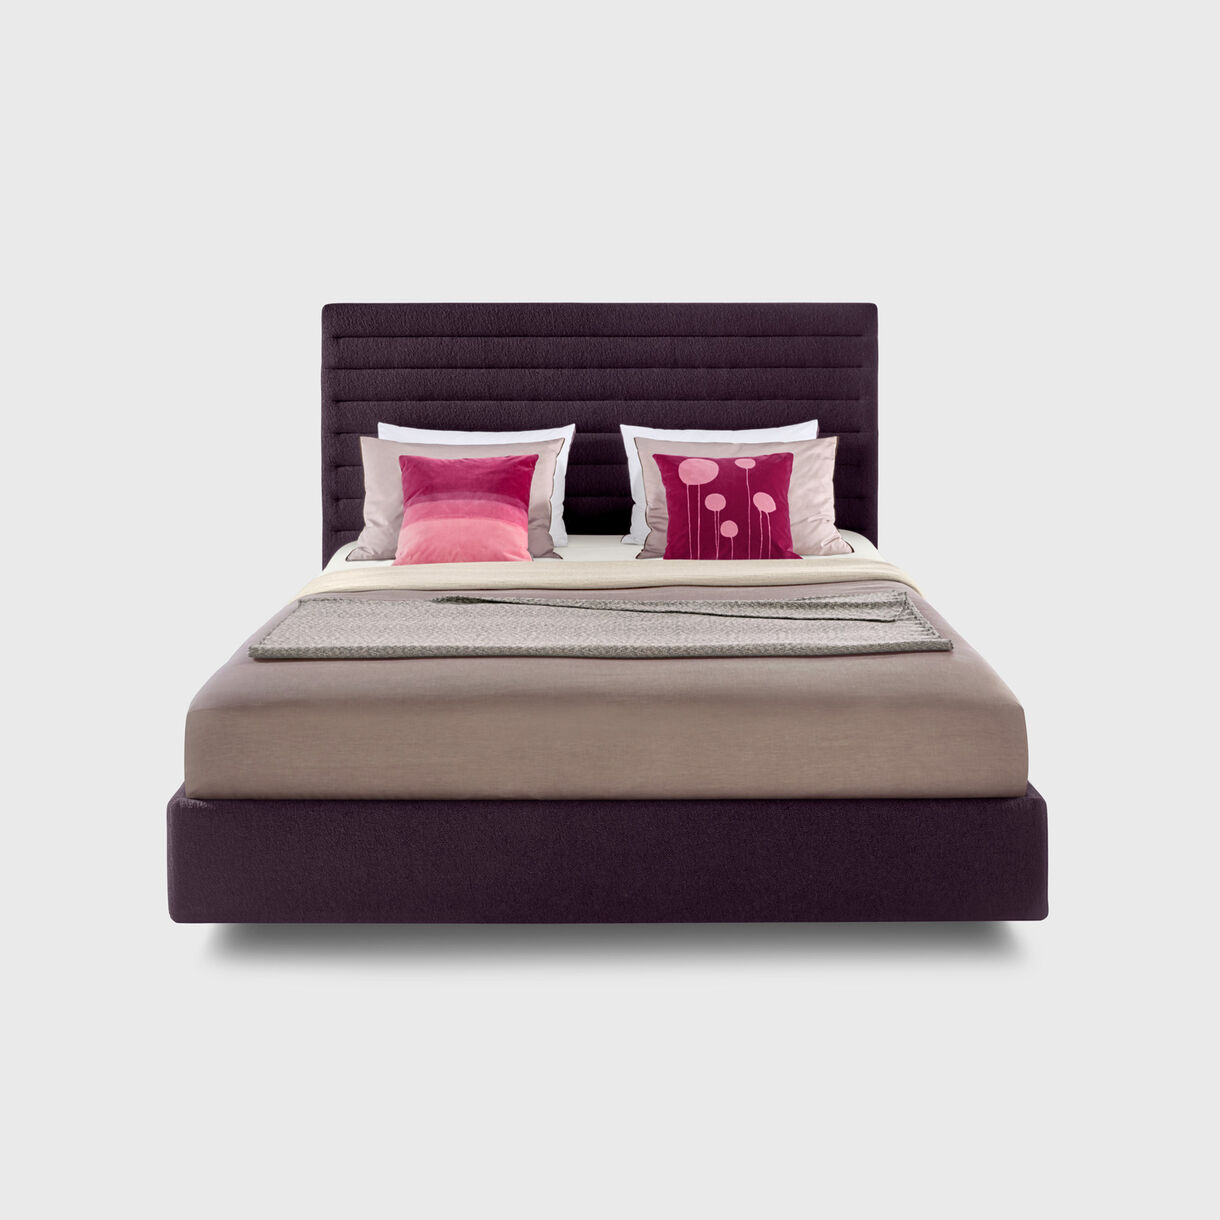 Ison Bed